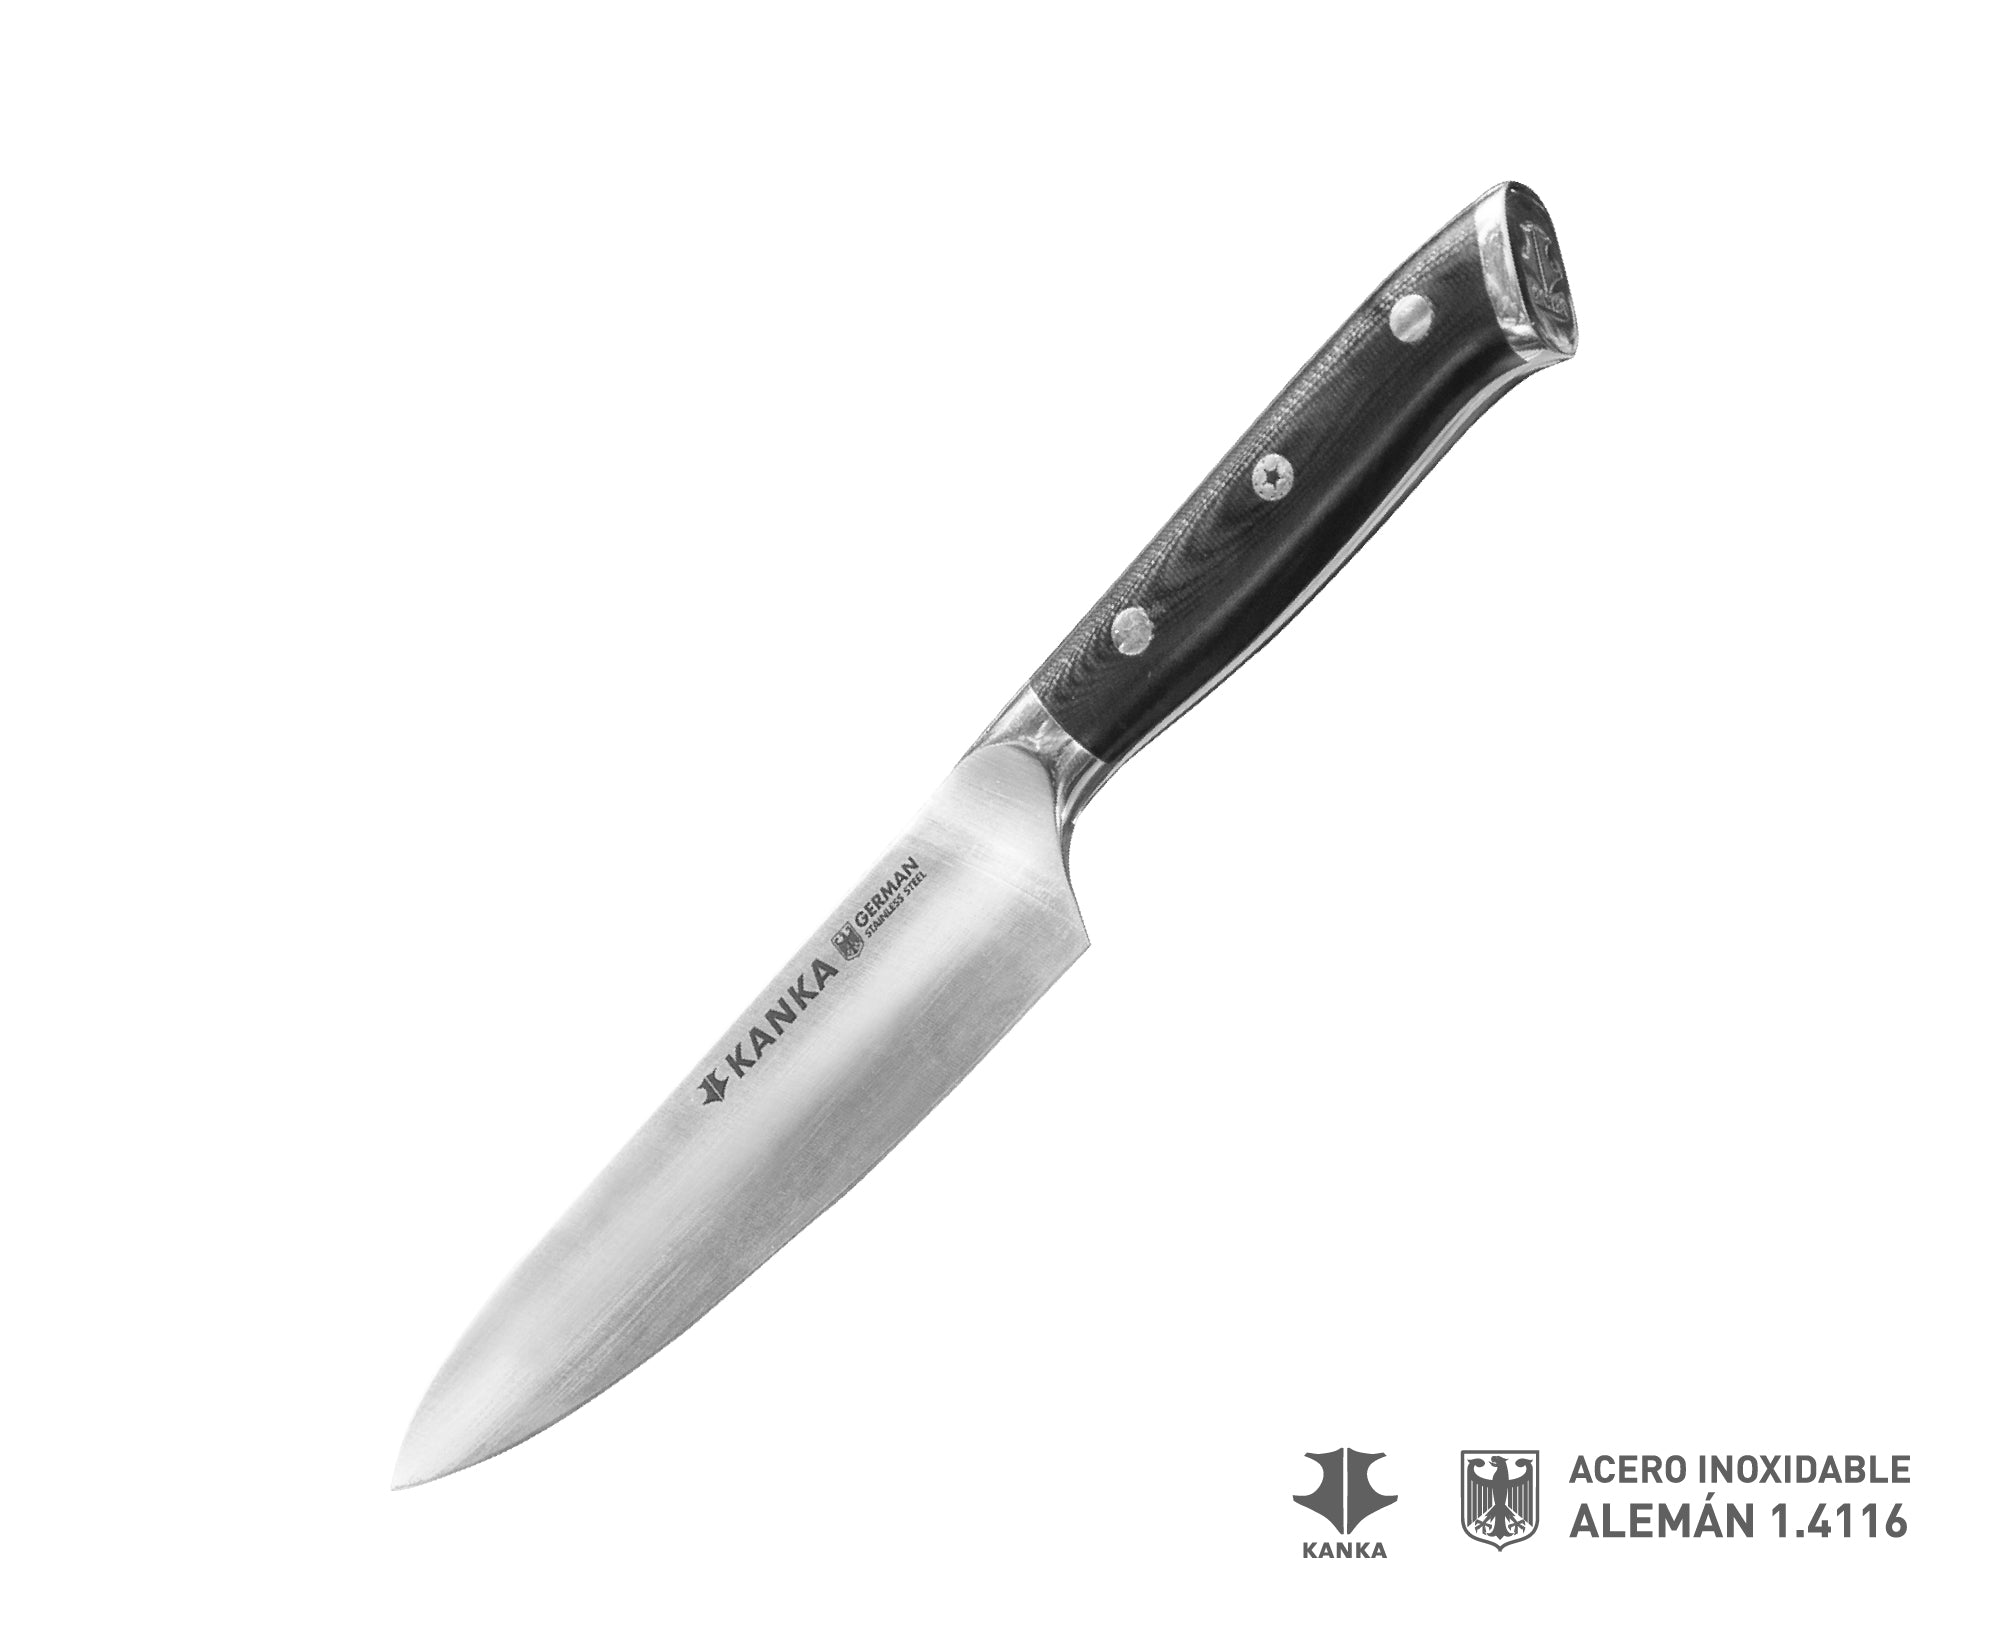 TURWHO 5 Inch Kitchen Utility Knives German 1.4116 Stainless Steel